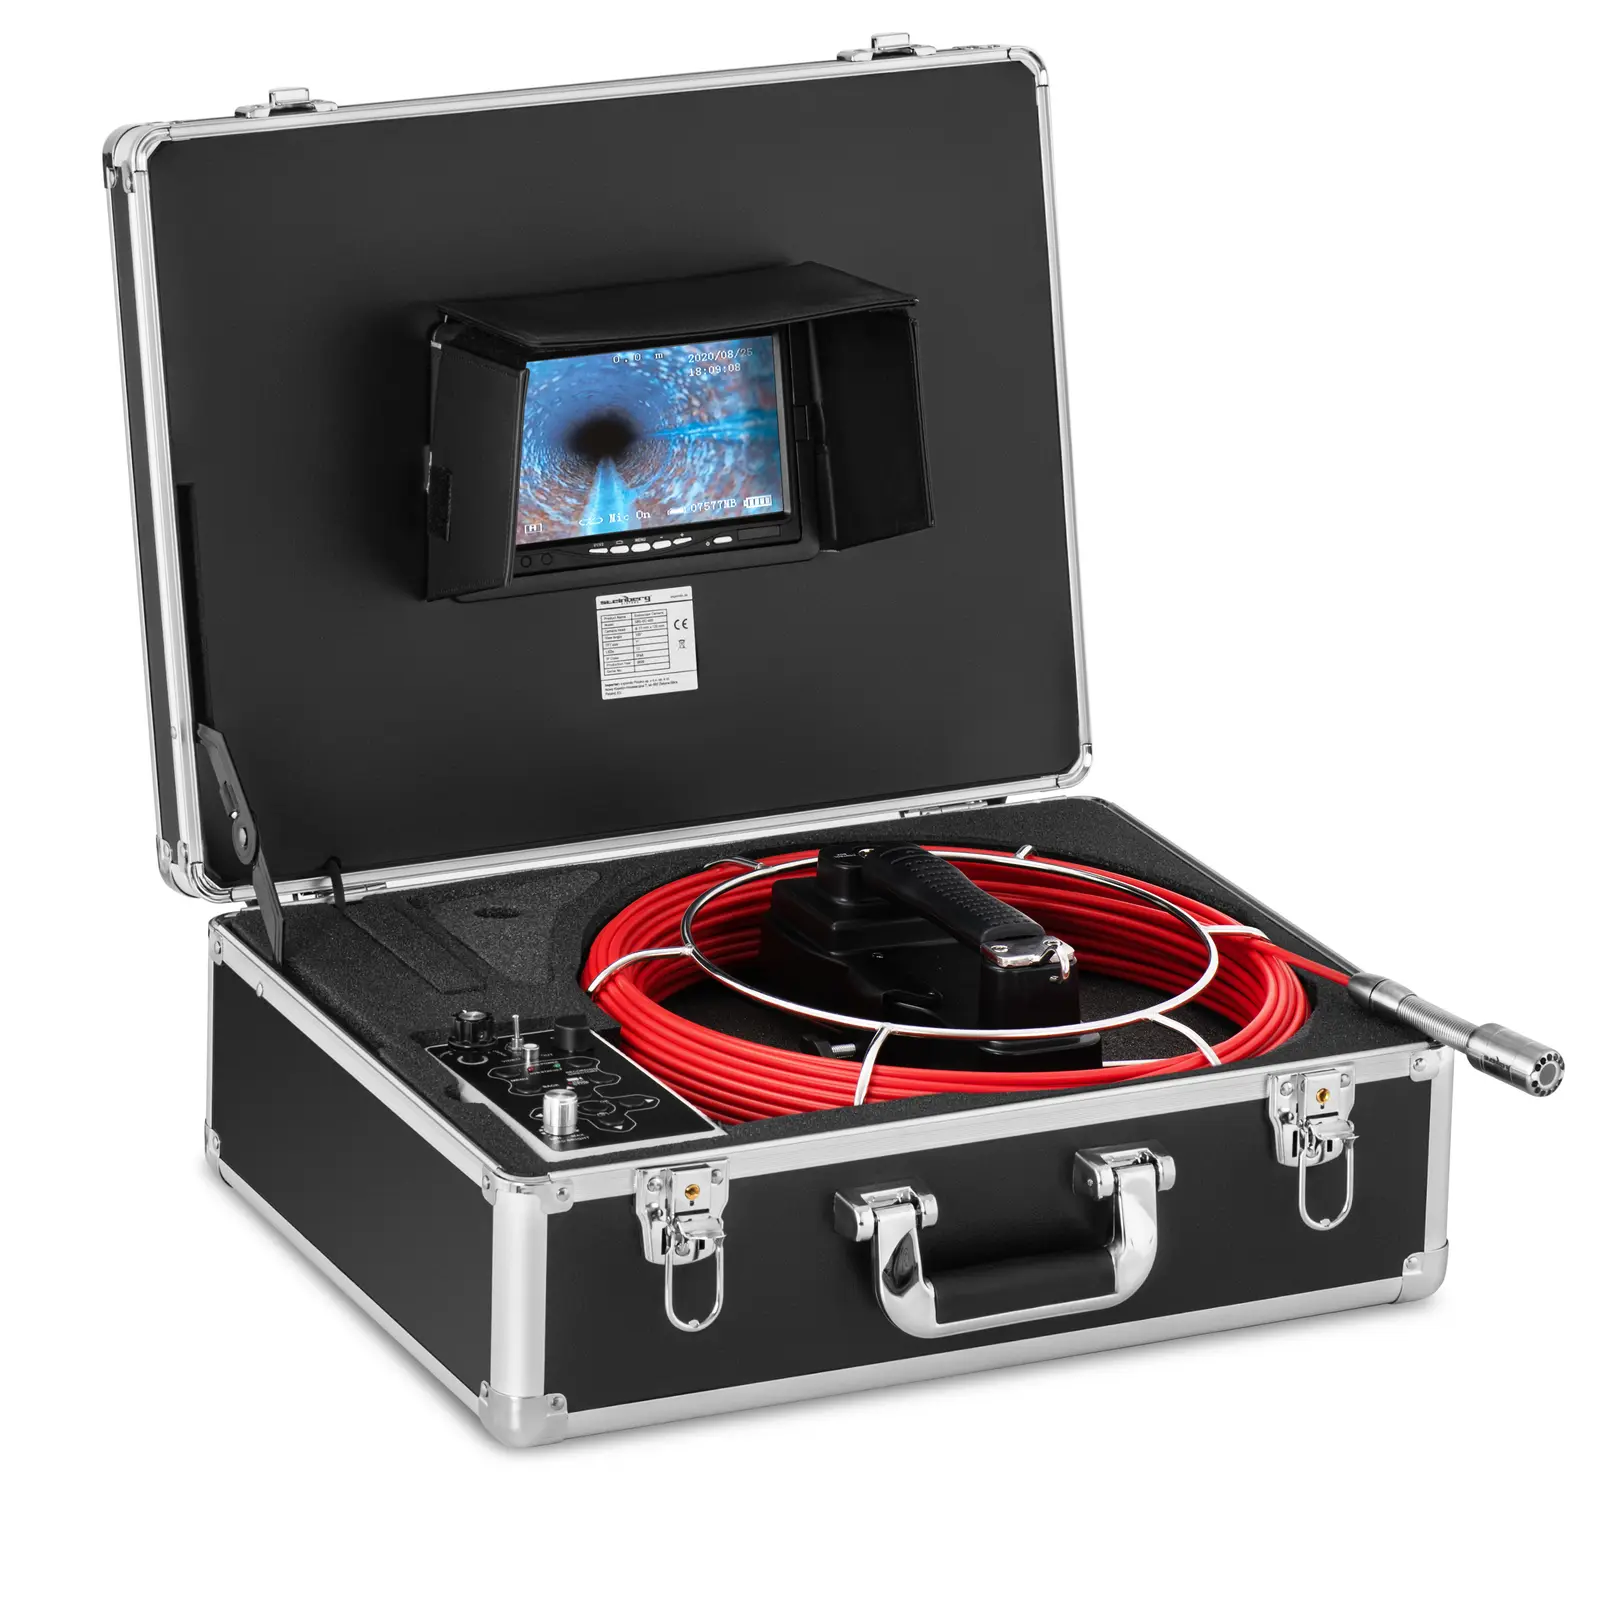 Endoscope Camera 20 m 12 Leds 7" Display - Endoscopes Inspection Cameras by Steinberg Systems